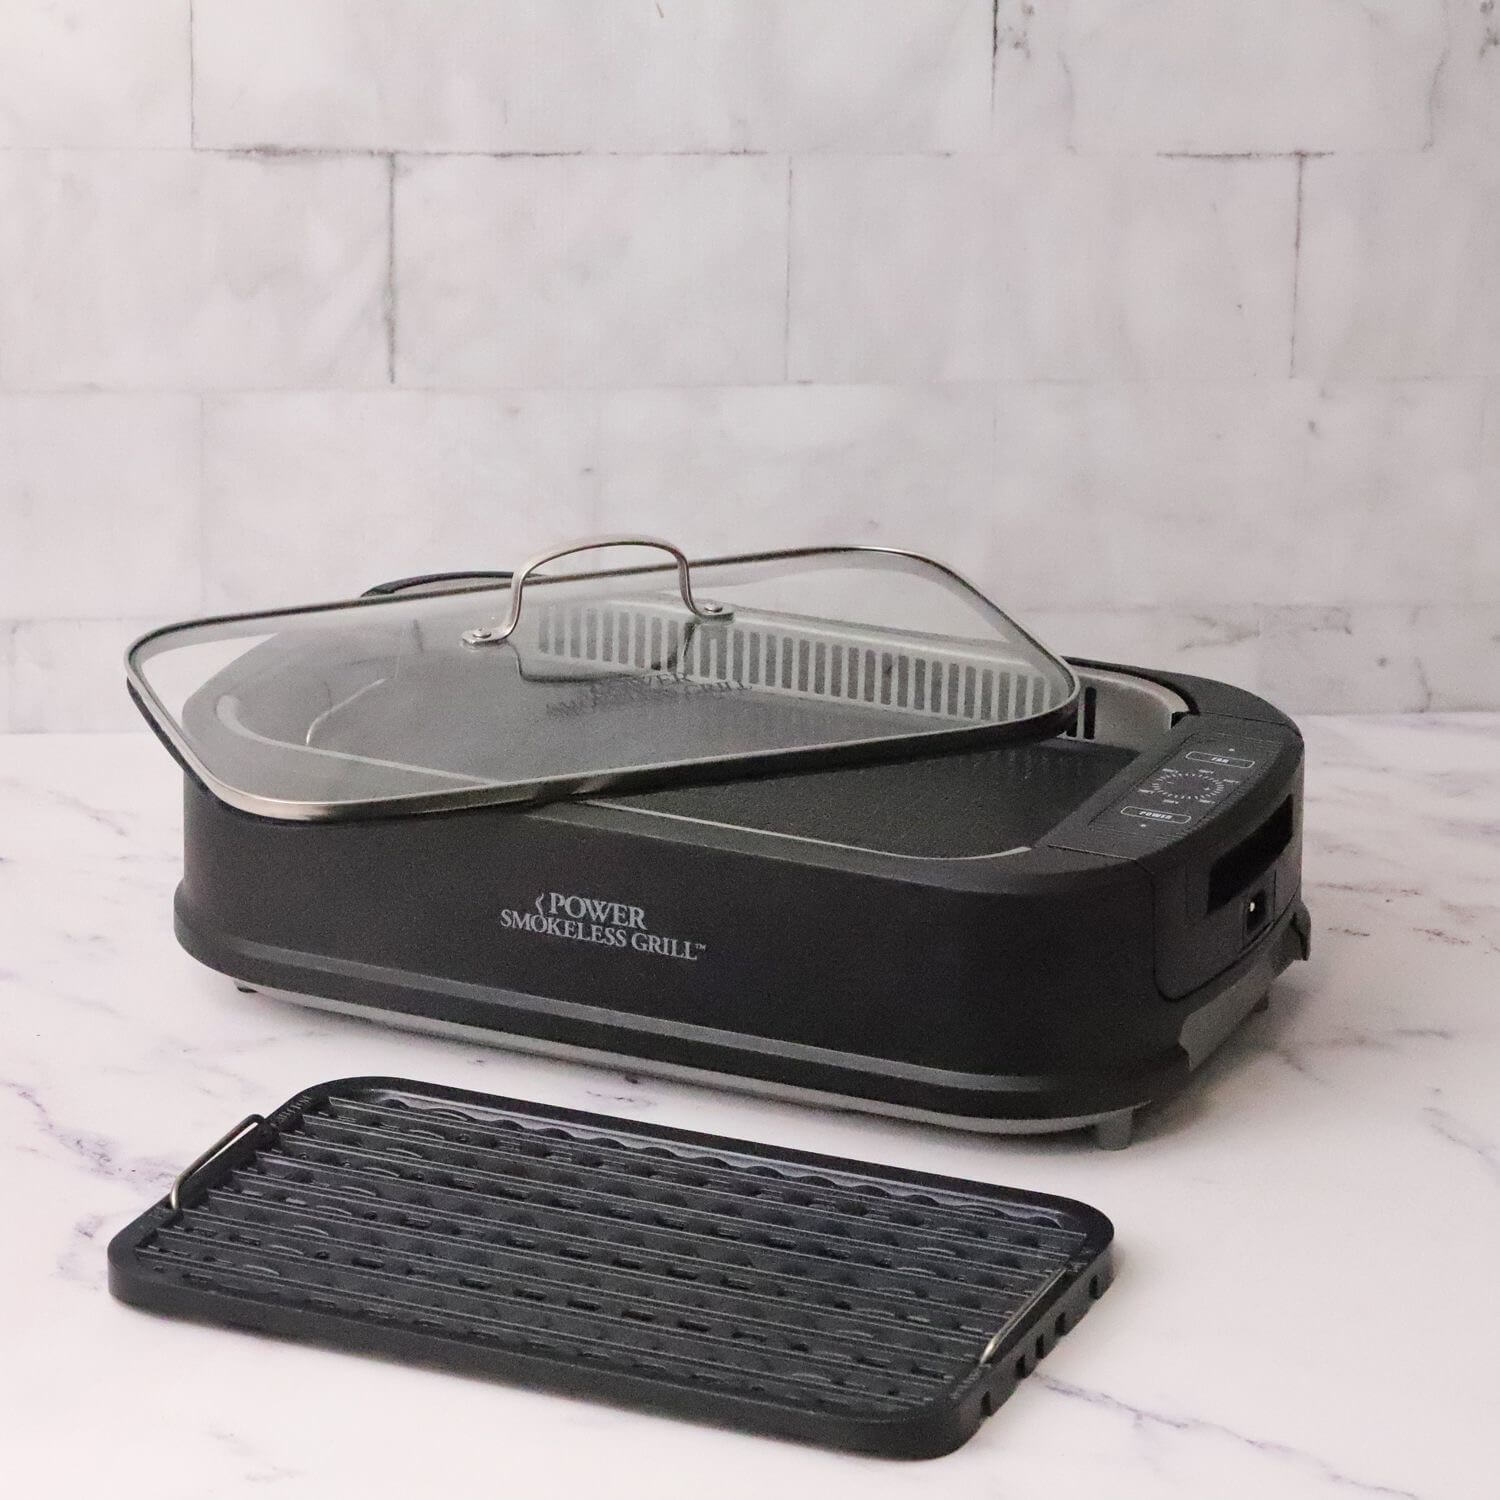 The way to clean the smokeless grill is quite simple